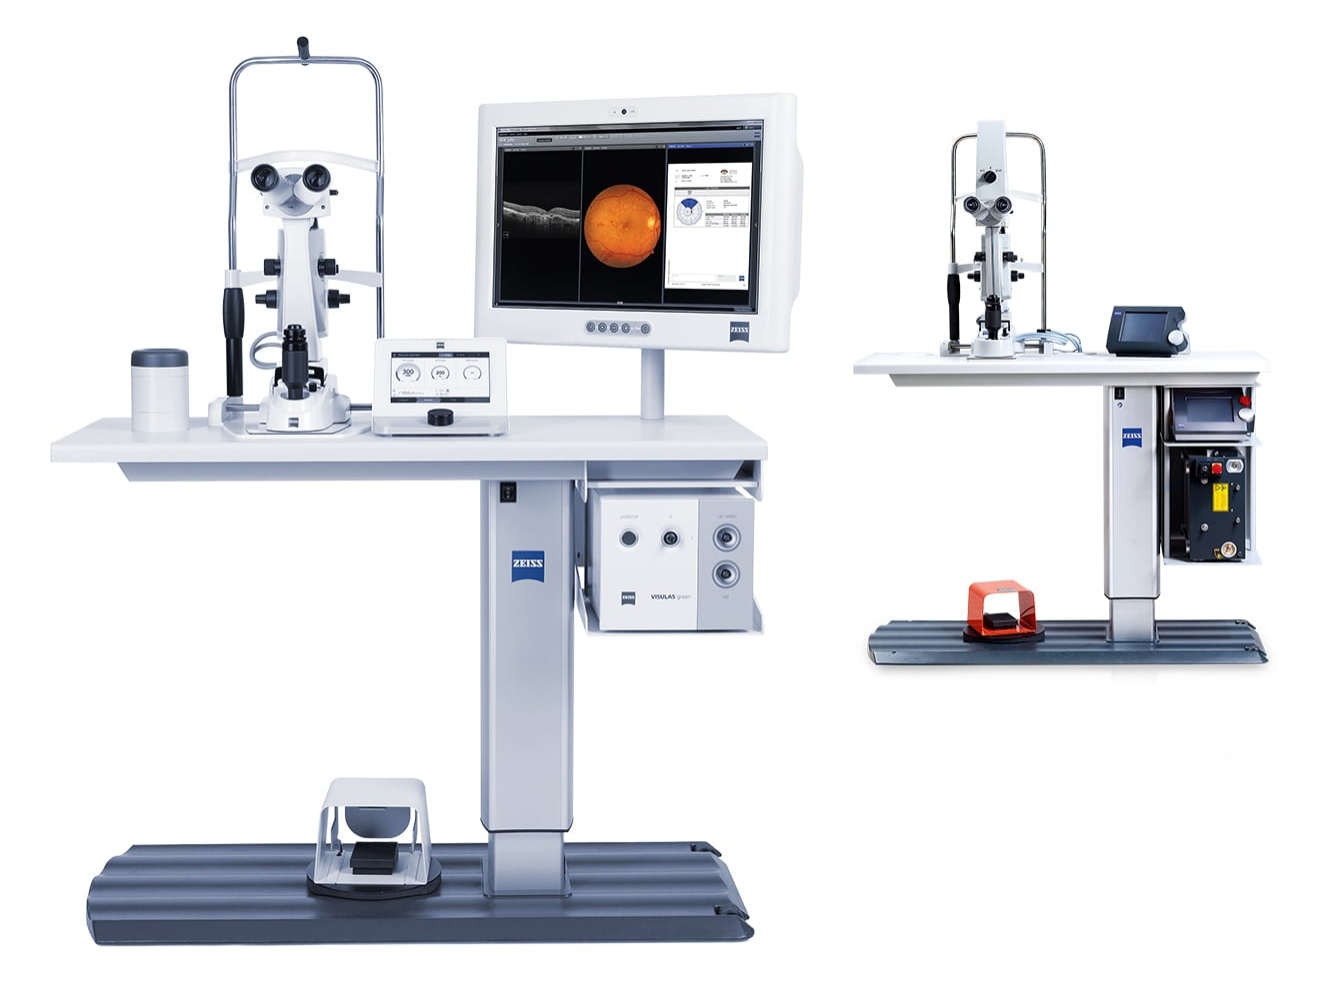 ZEISS Therapeutic lasers